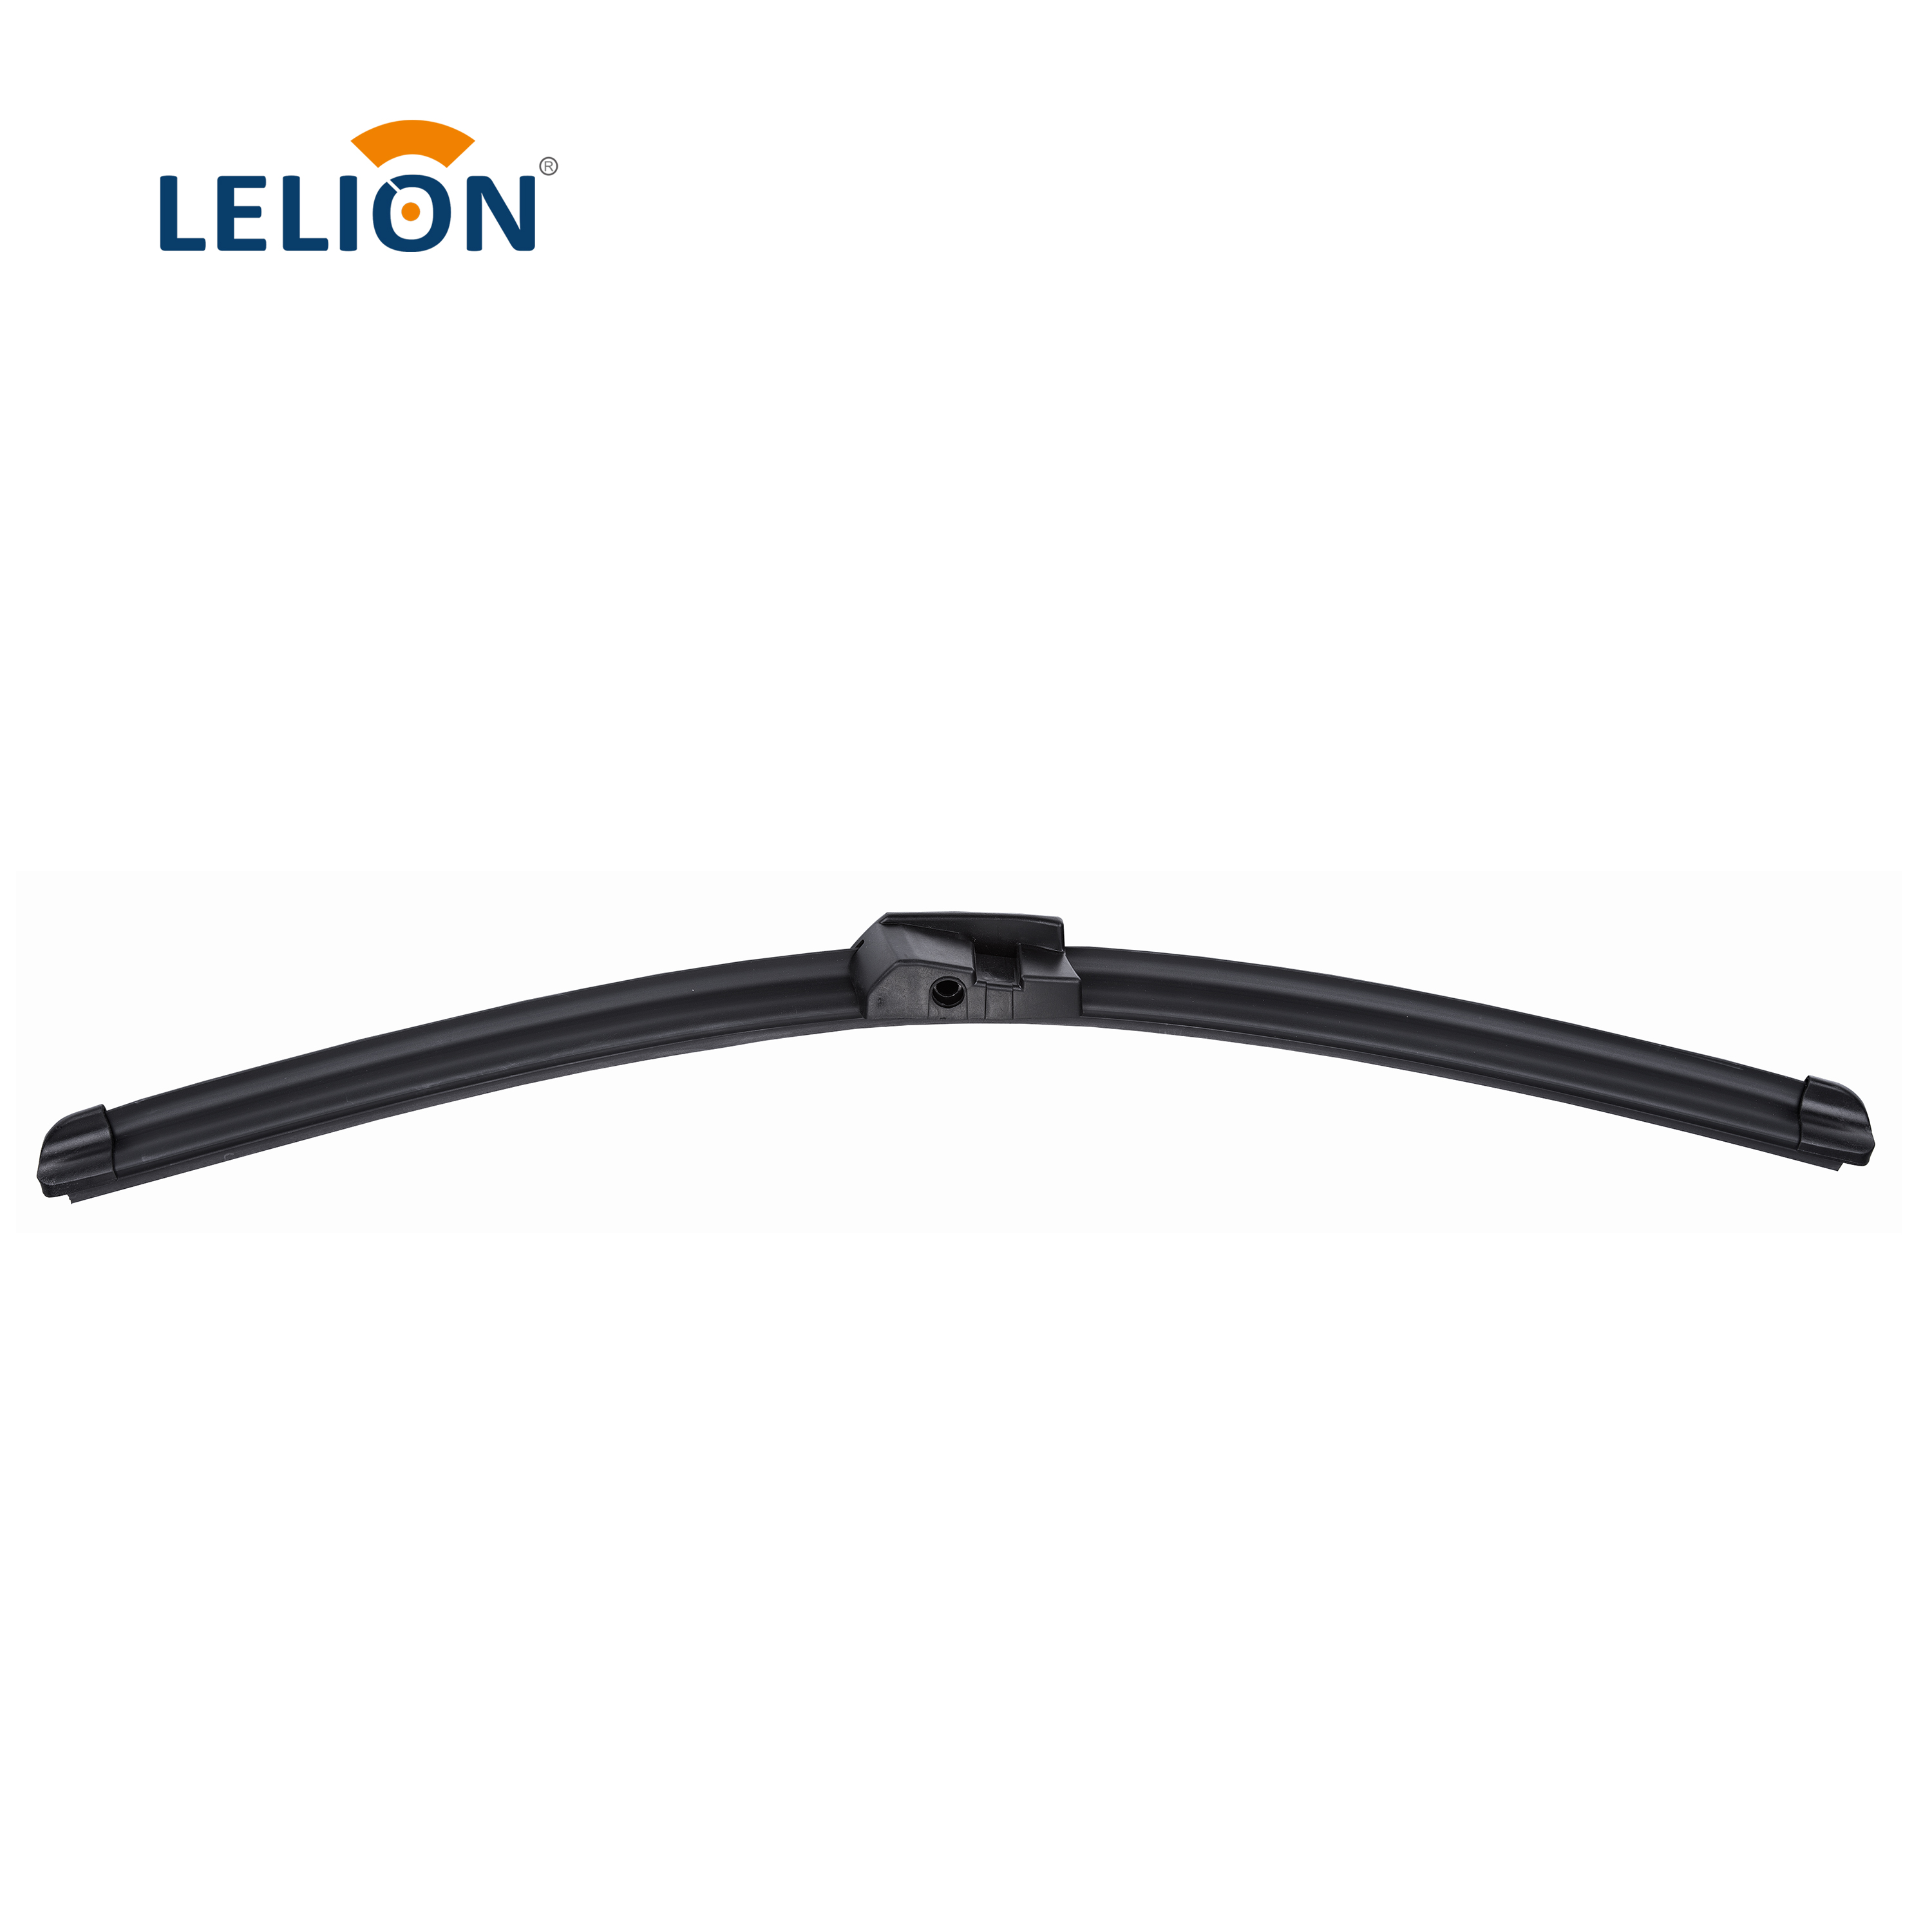 LELION 832 OEM Exact Fit Flat Wiper Blade for BMW 7&5 Series